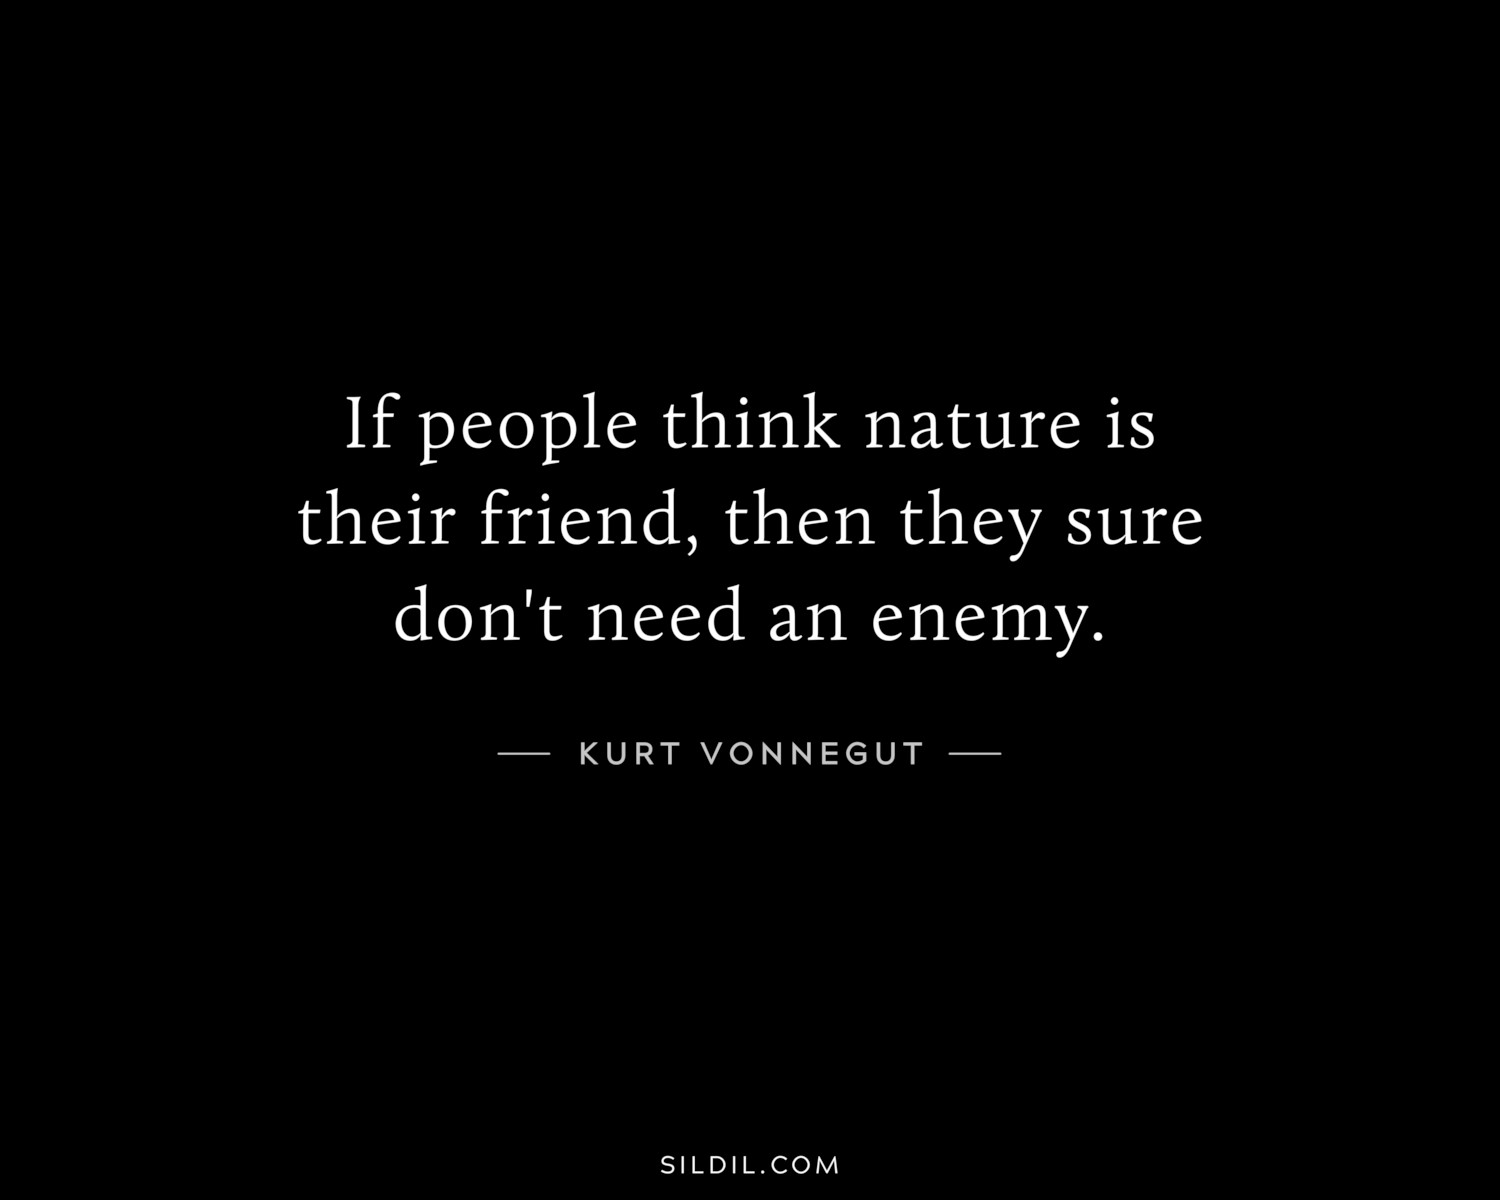 If people think nature is their friend, then they sure don't need an enemy.